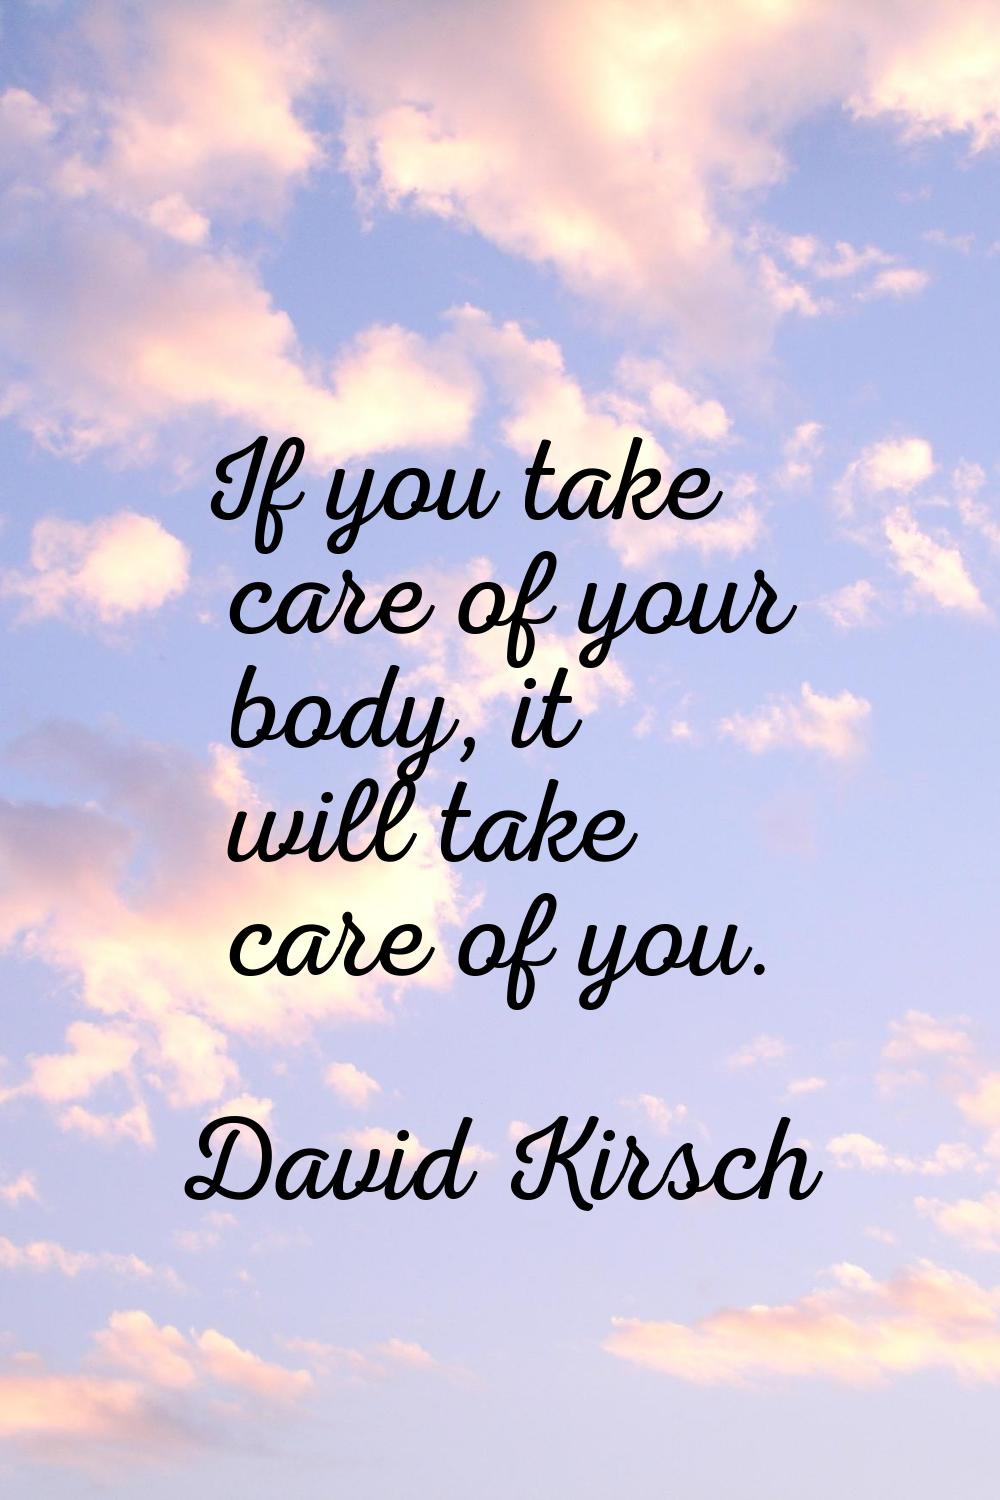 If you take care of your body, it will take care of you.